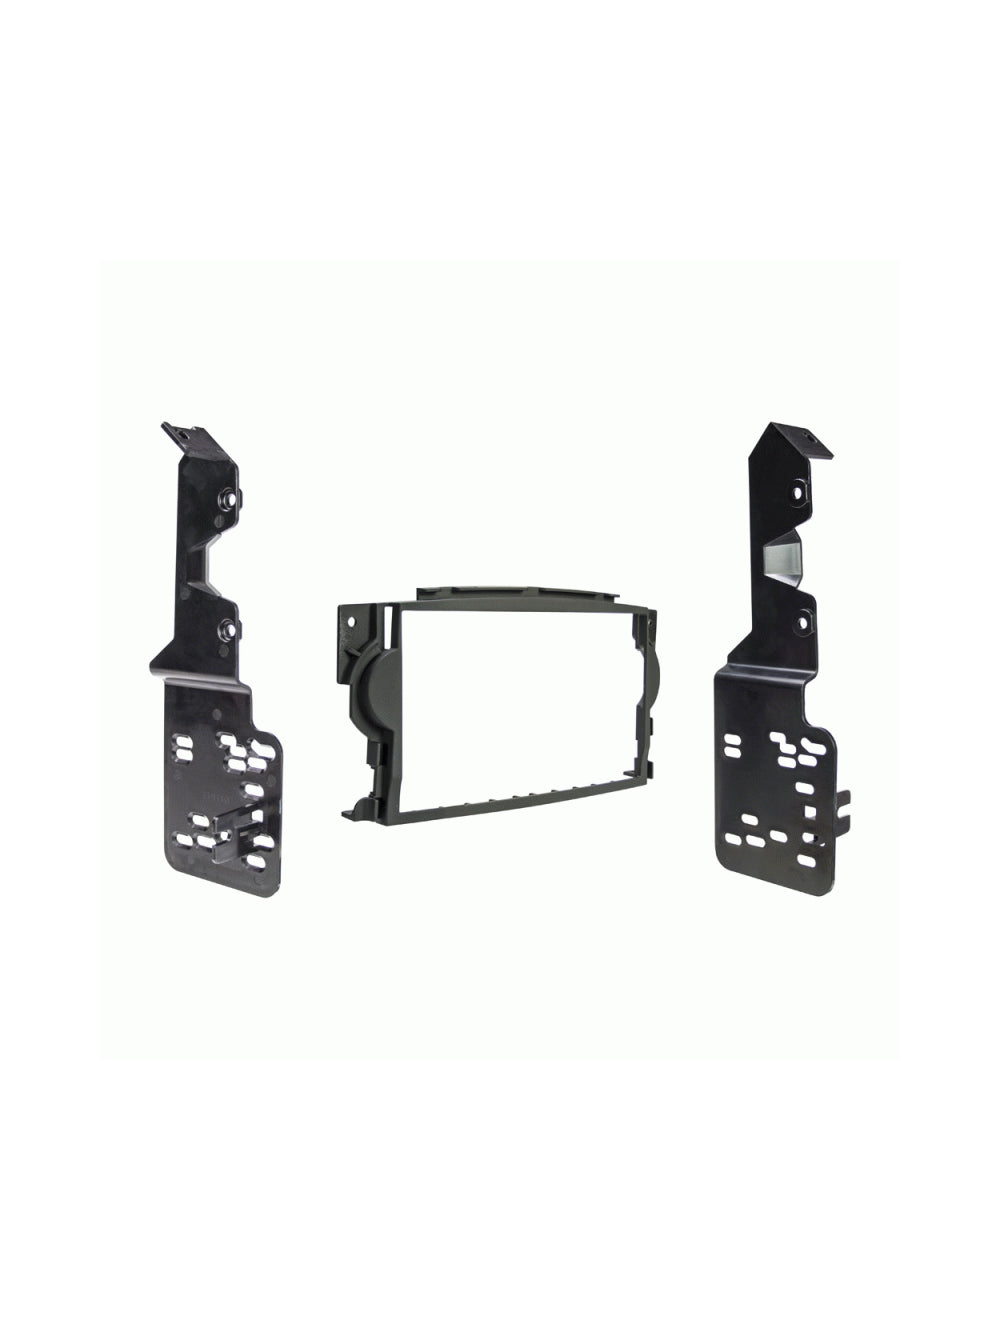 Metra 95-7815B Double DIN Dash Kit For 2004-2008 Acura TL